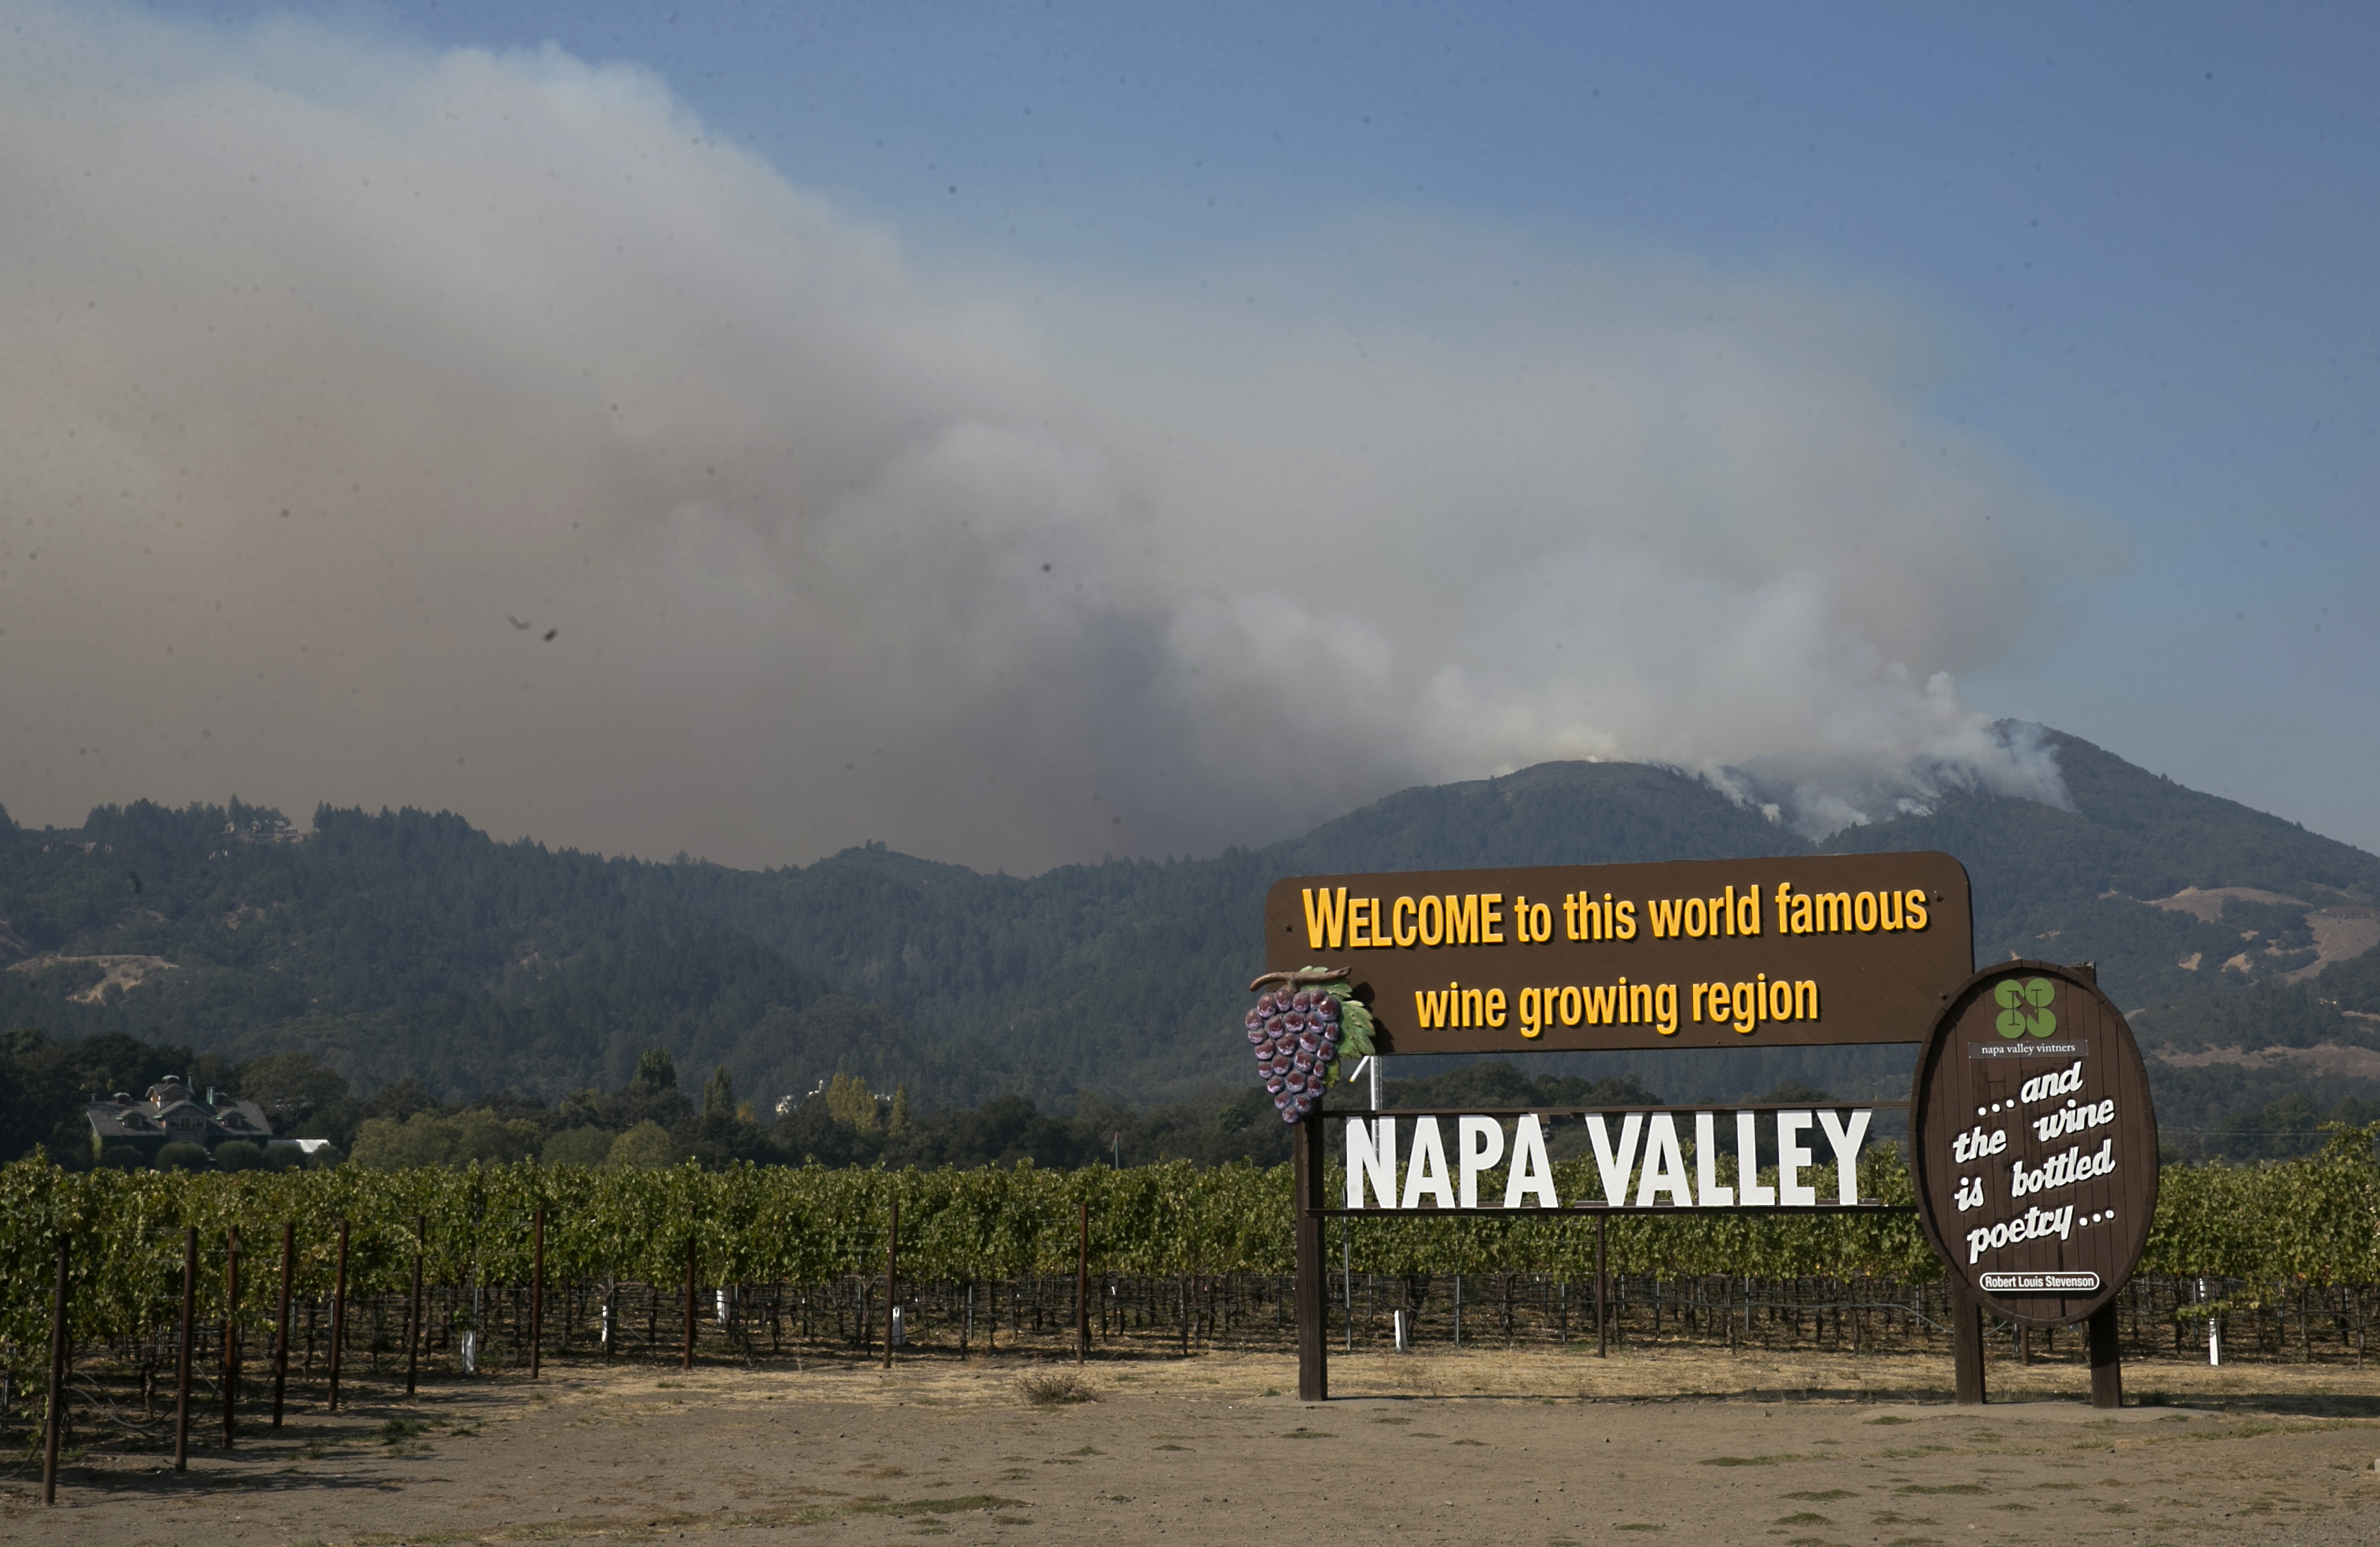 Wildfires Are Hurting the Wine Industry. These Scientists Are on a Mission To Save It